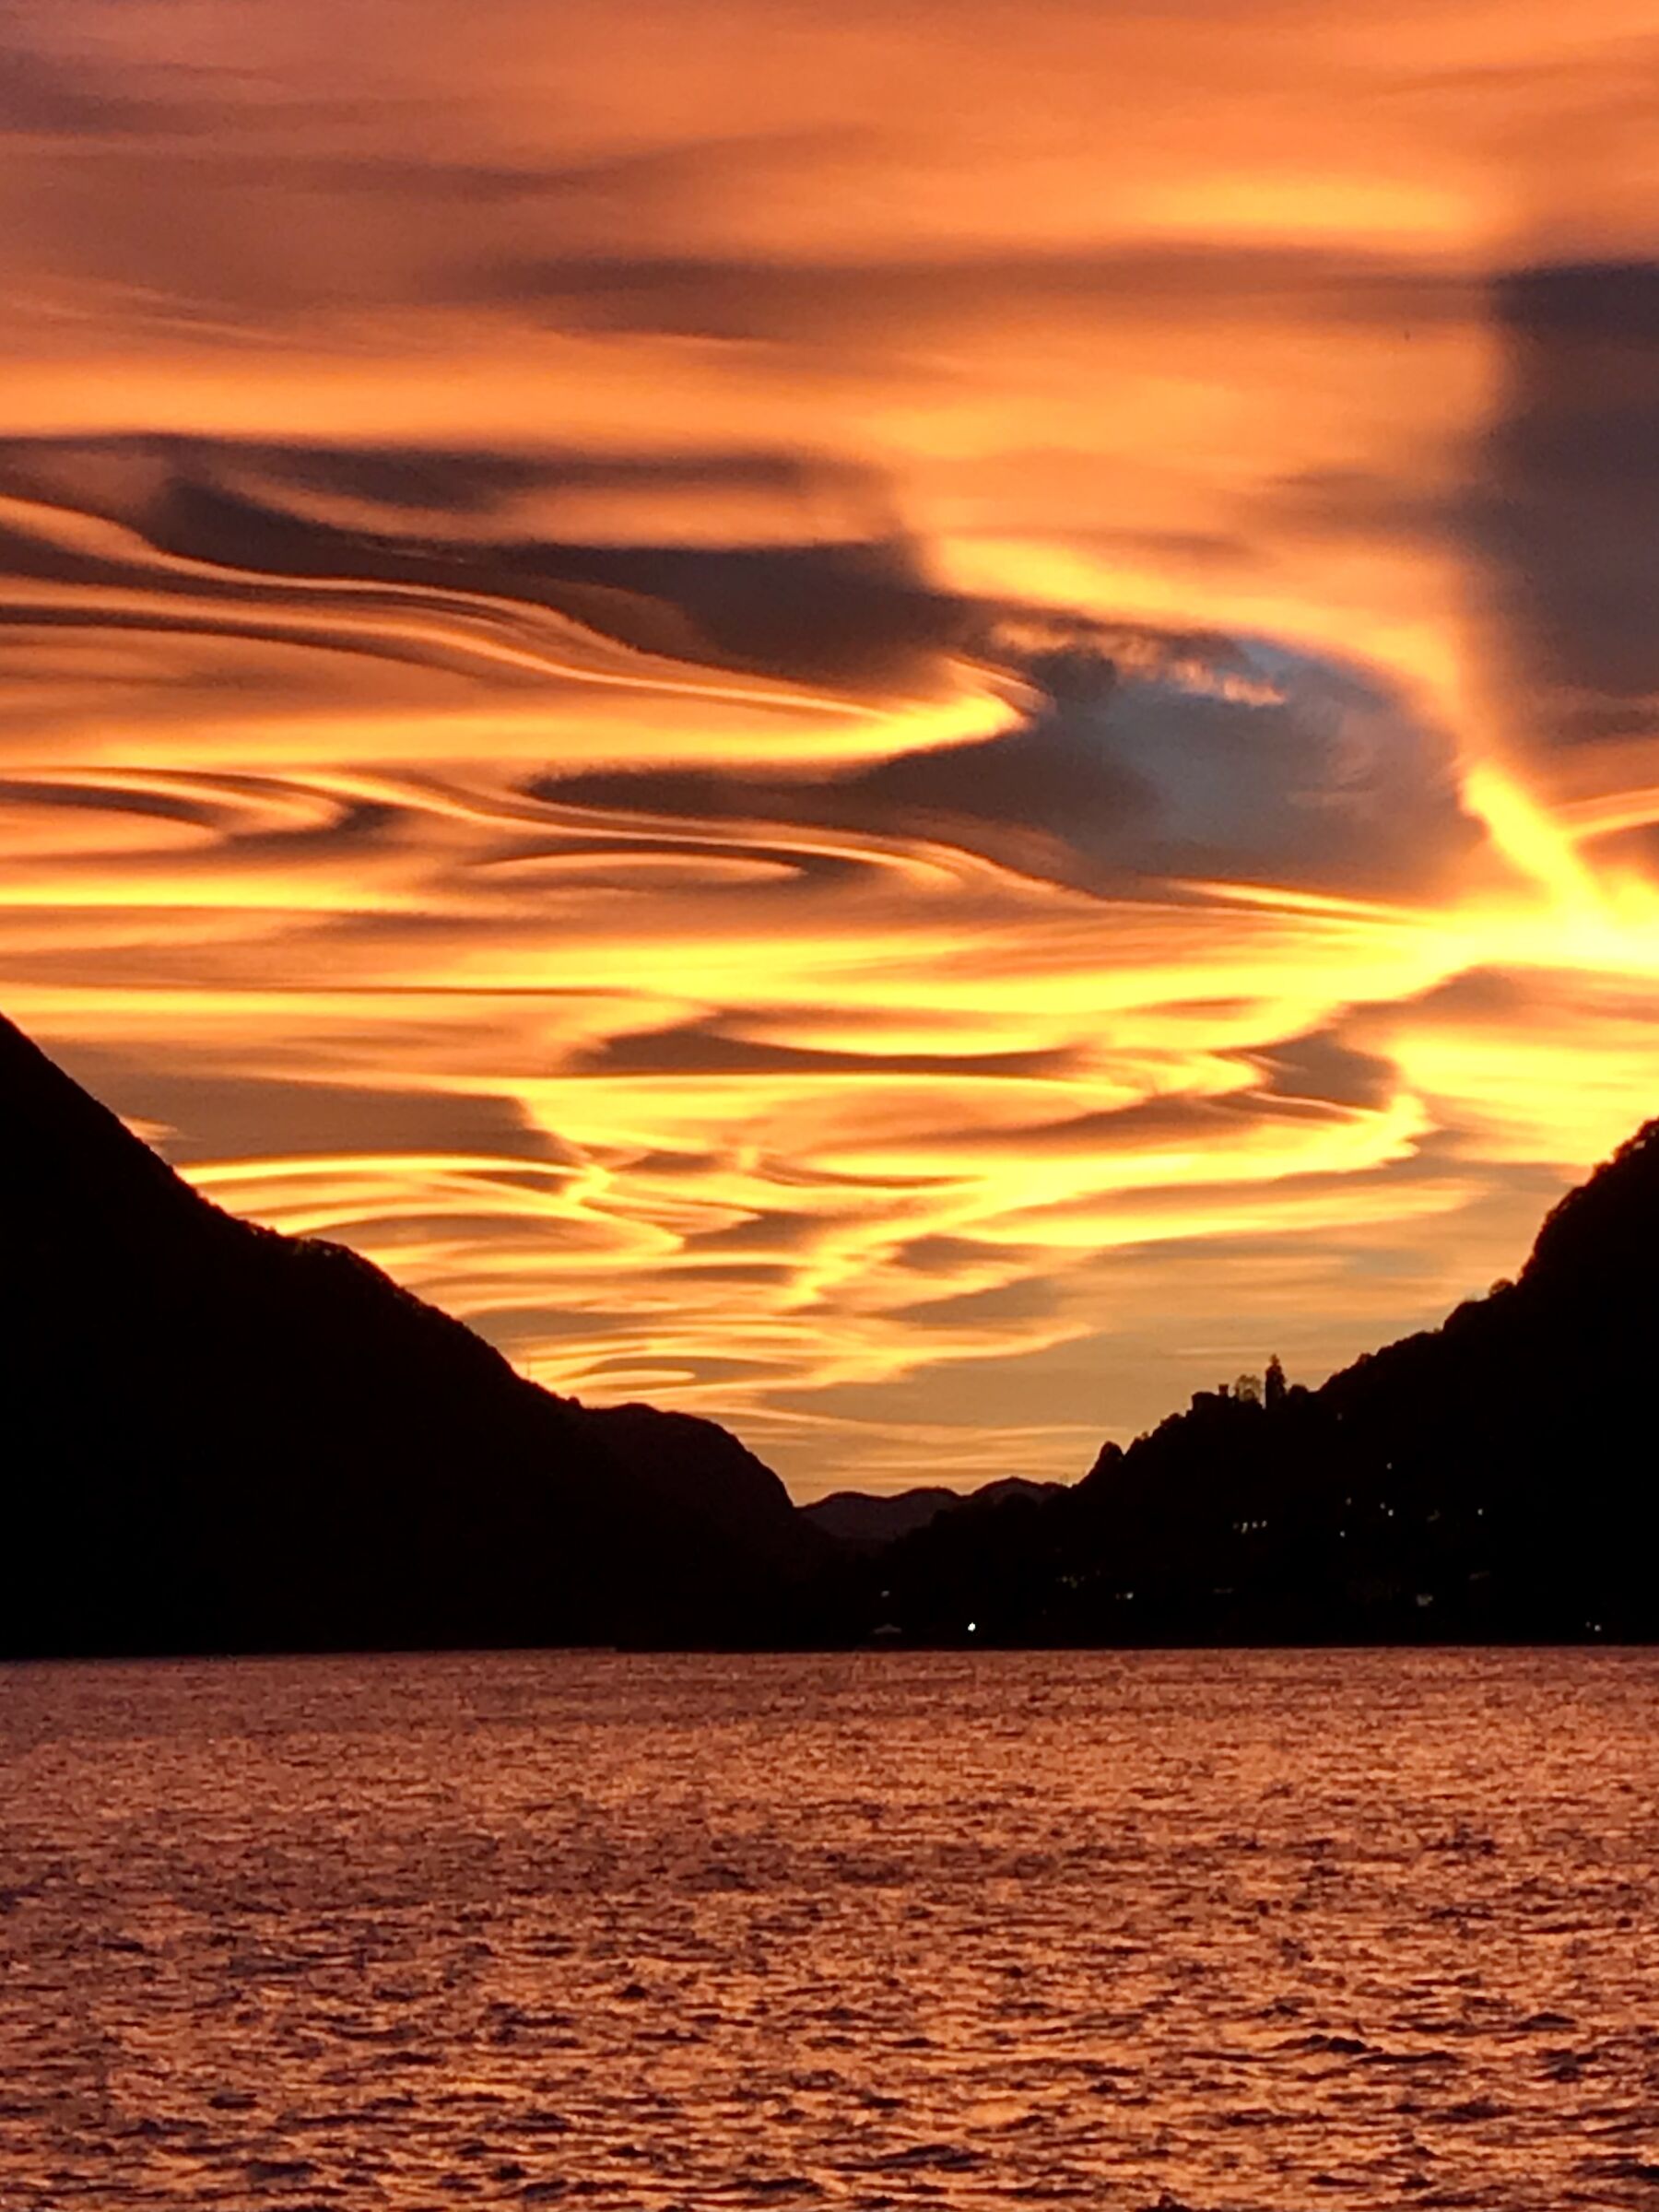 Sunset with lenticular clouds...